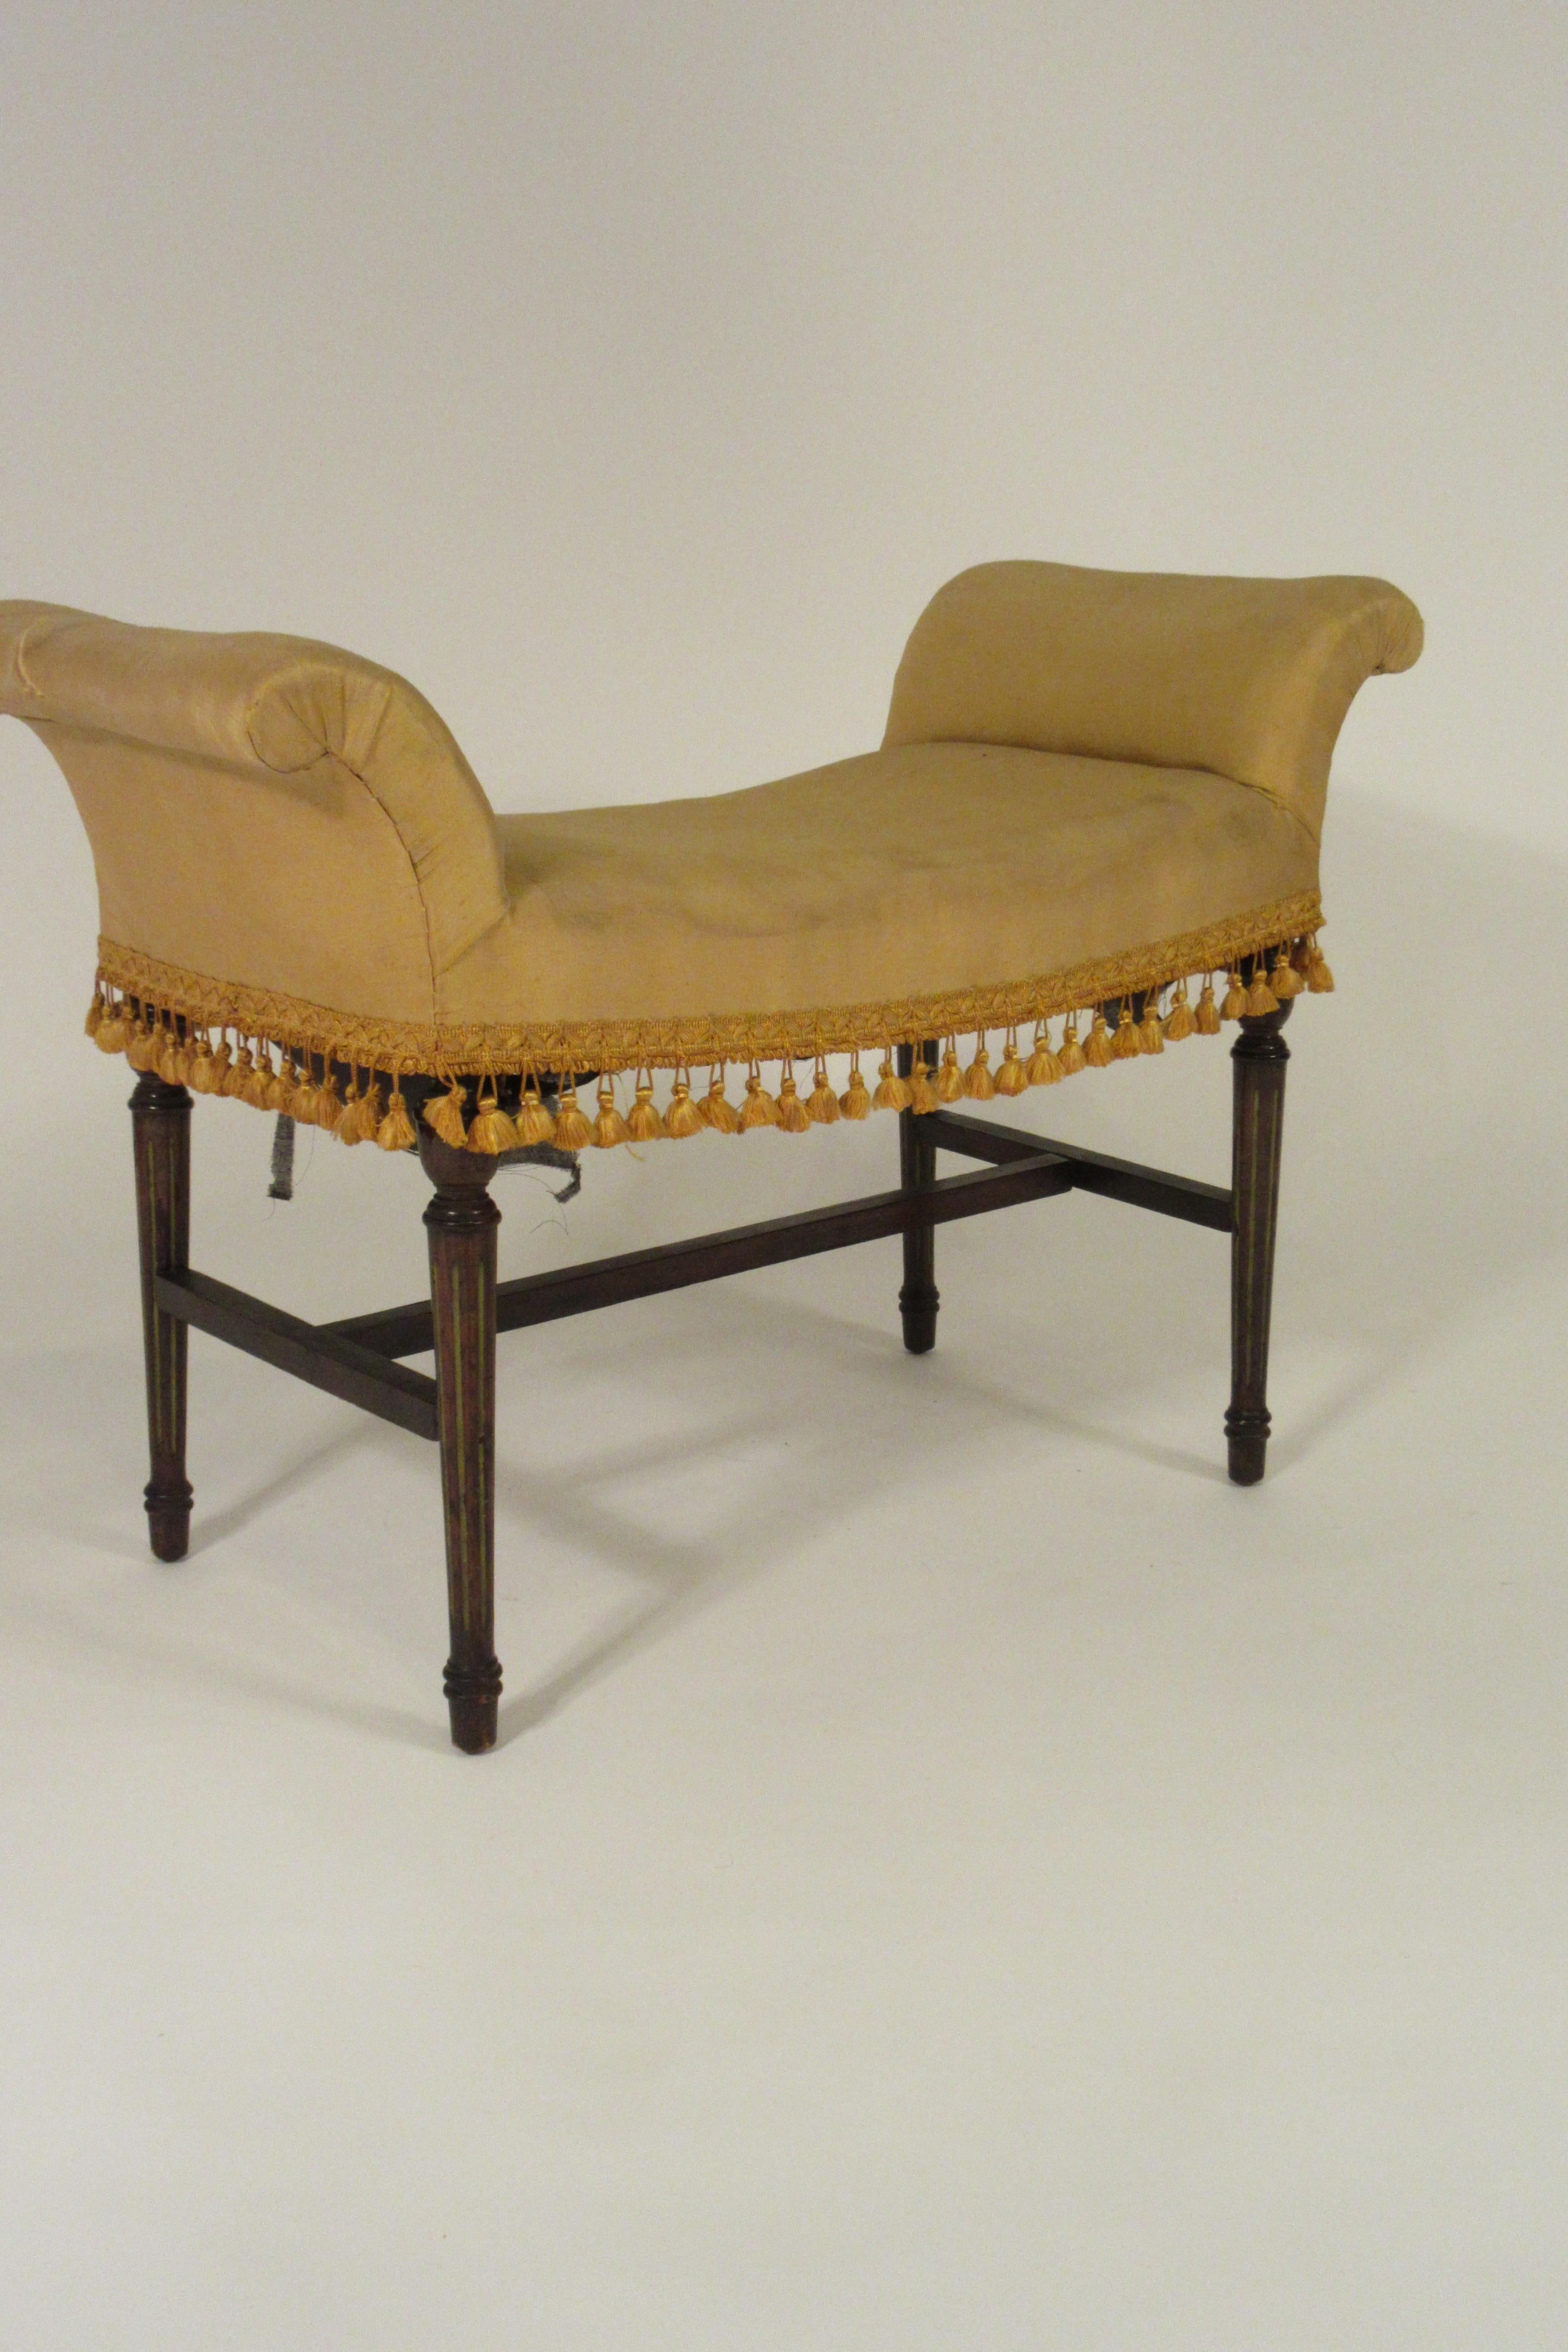 Early 20th Century 1920s Scrolled Arm Bench